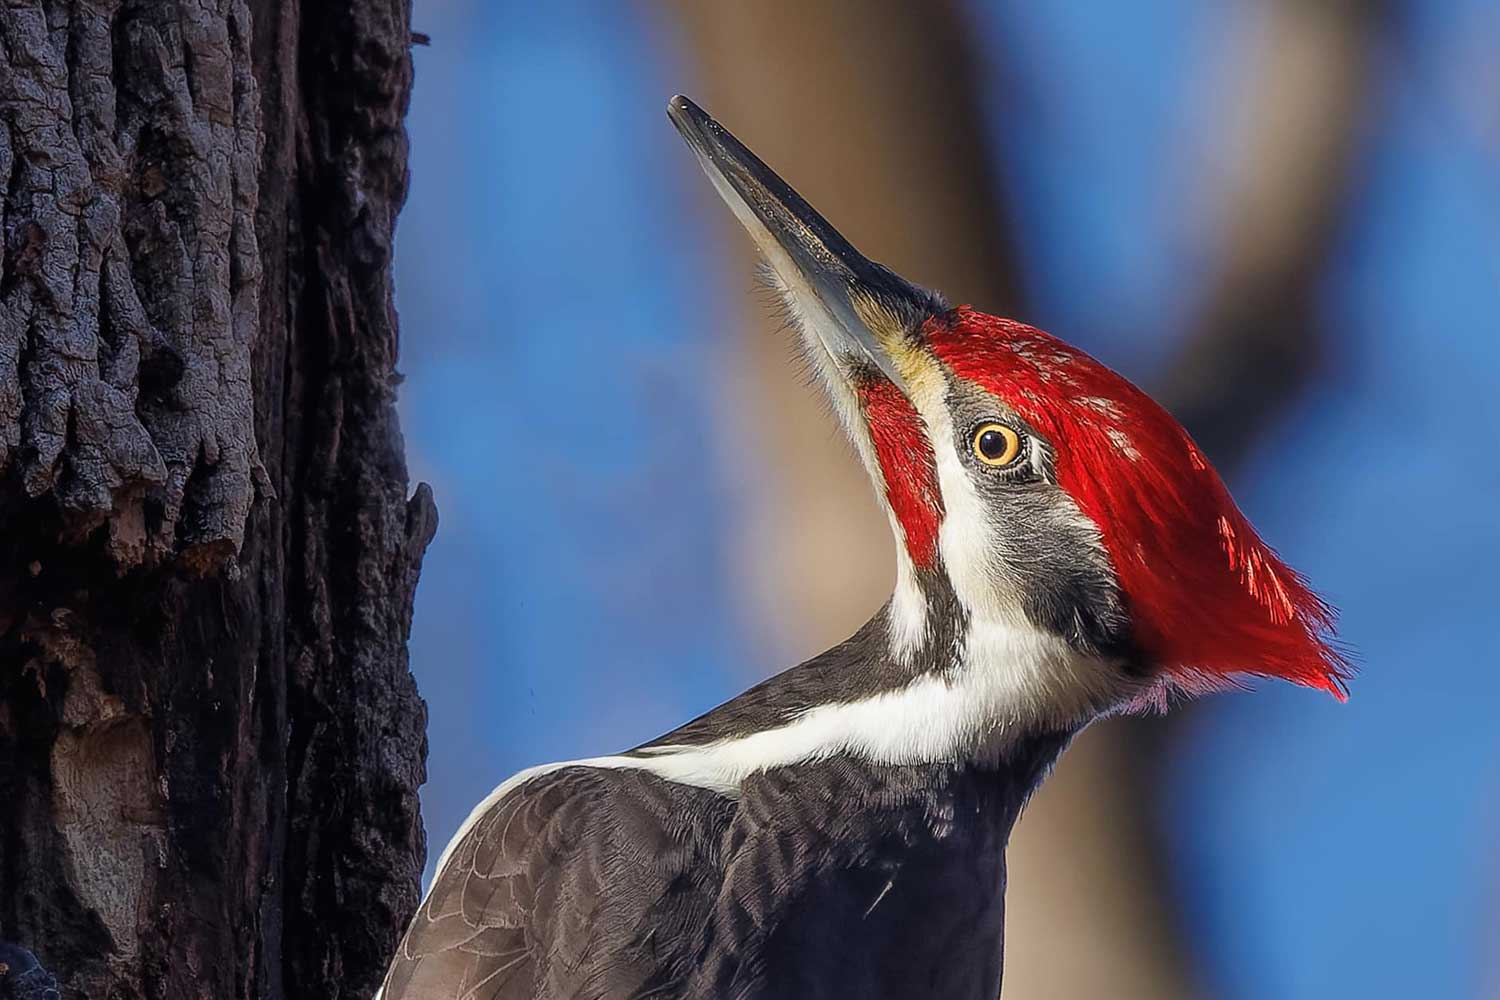 A close-up of a pileated woodpecker's face.